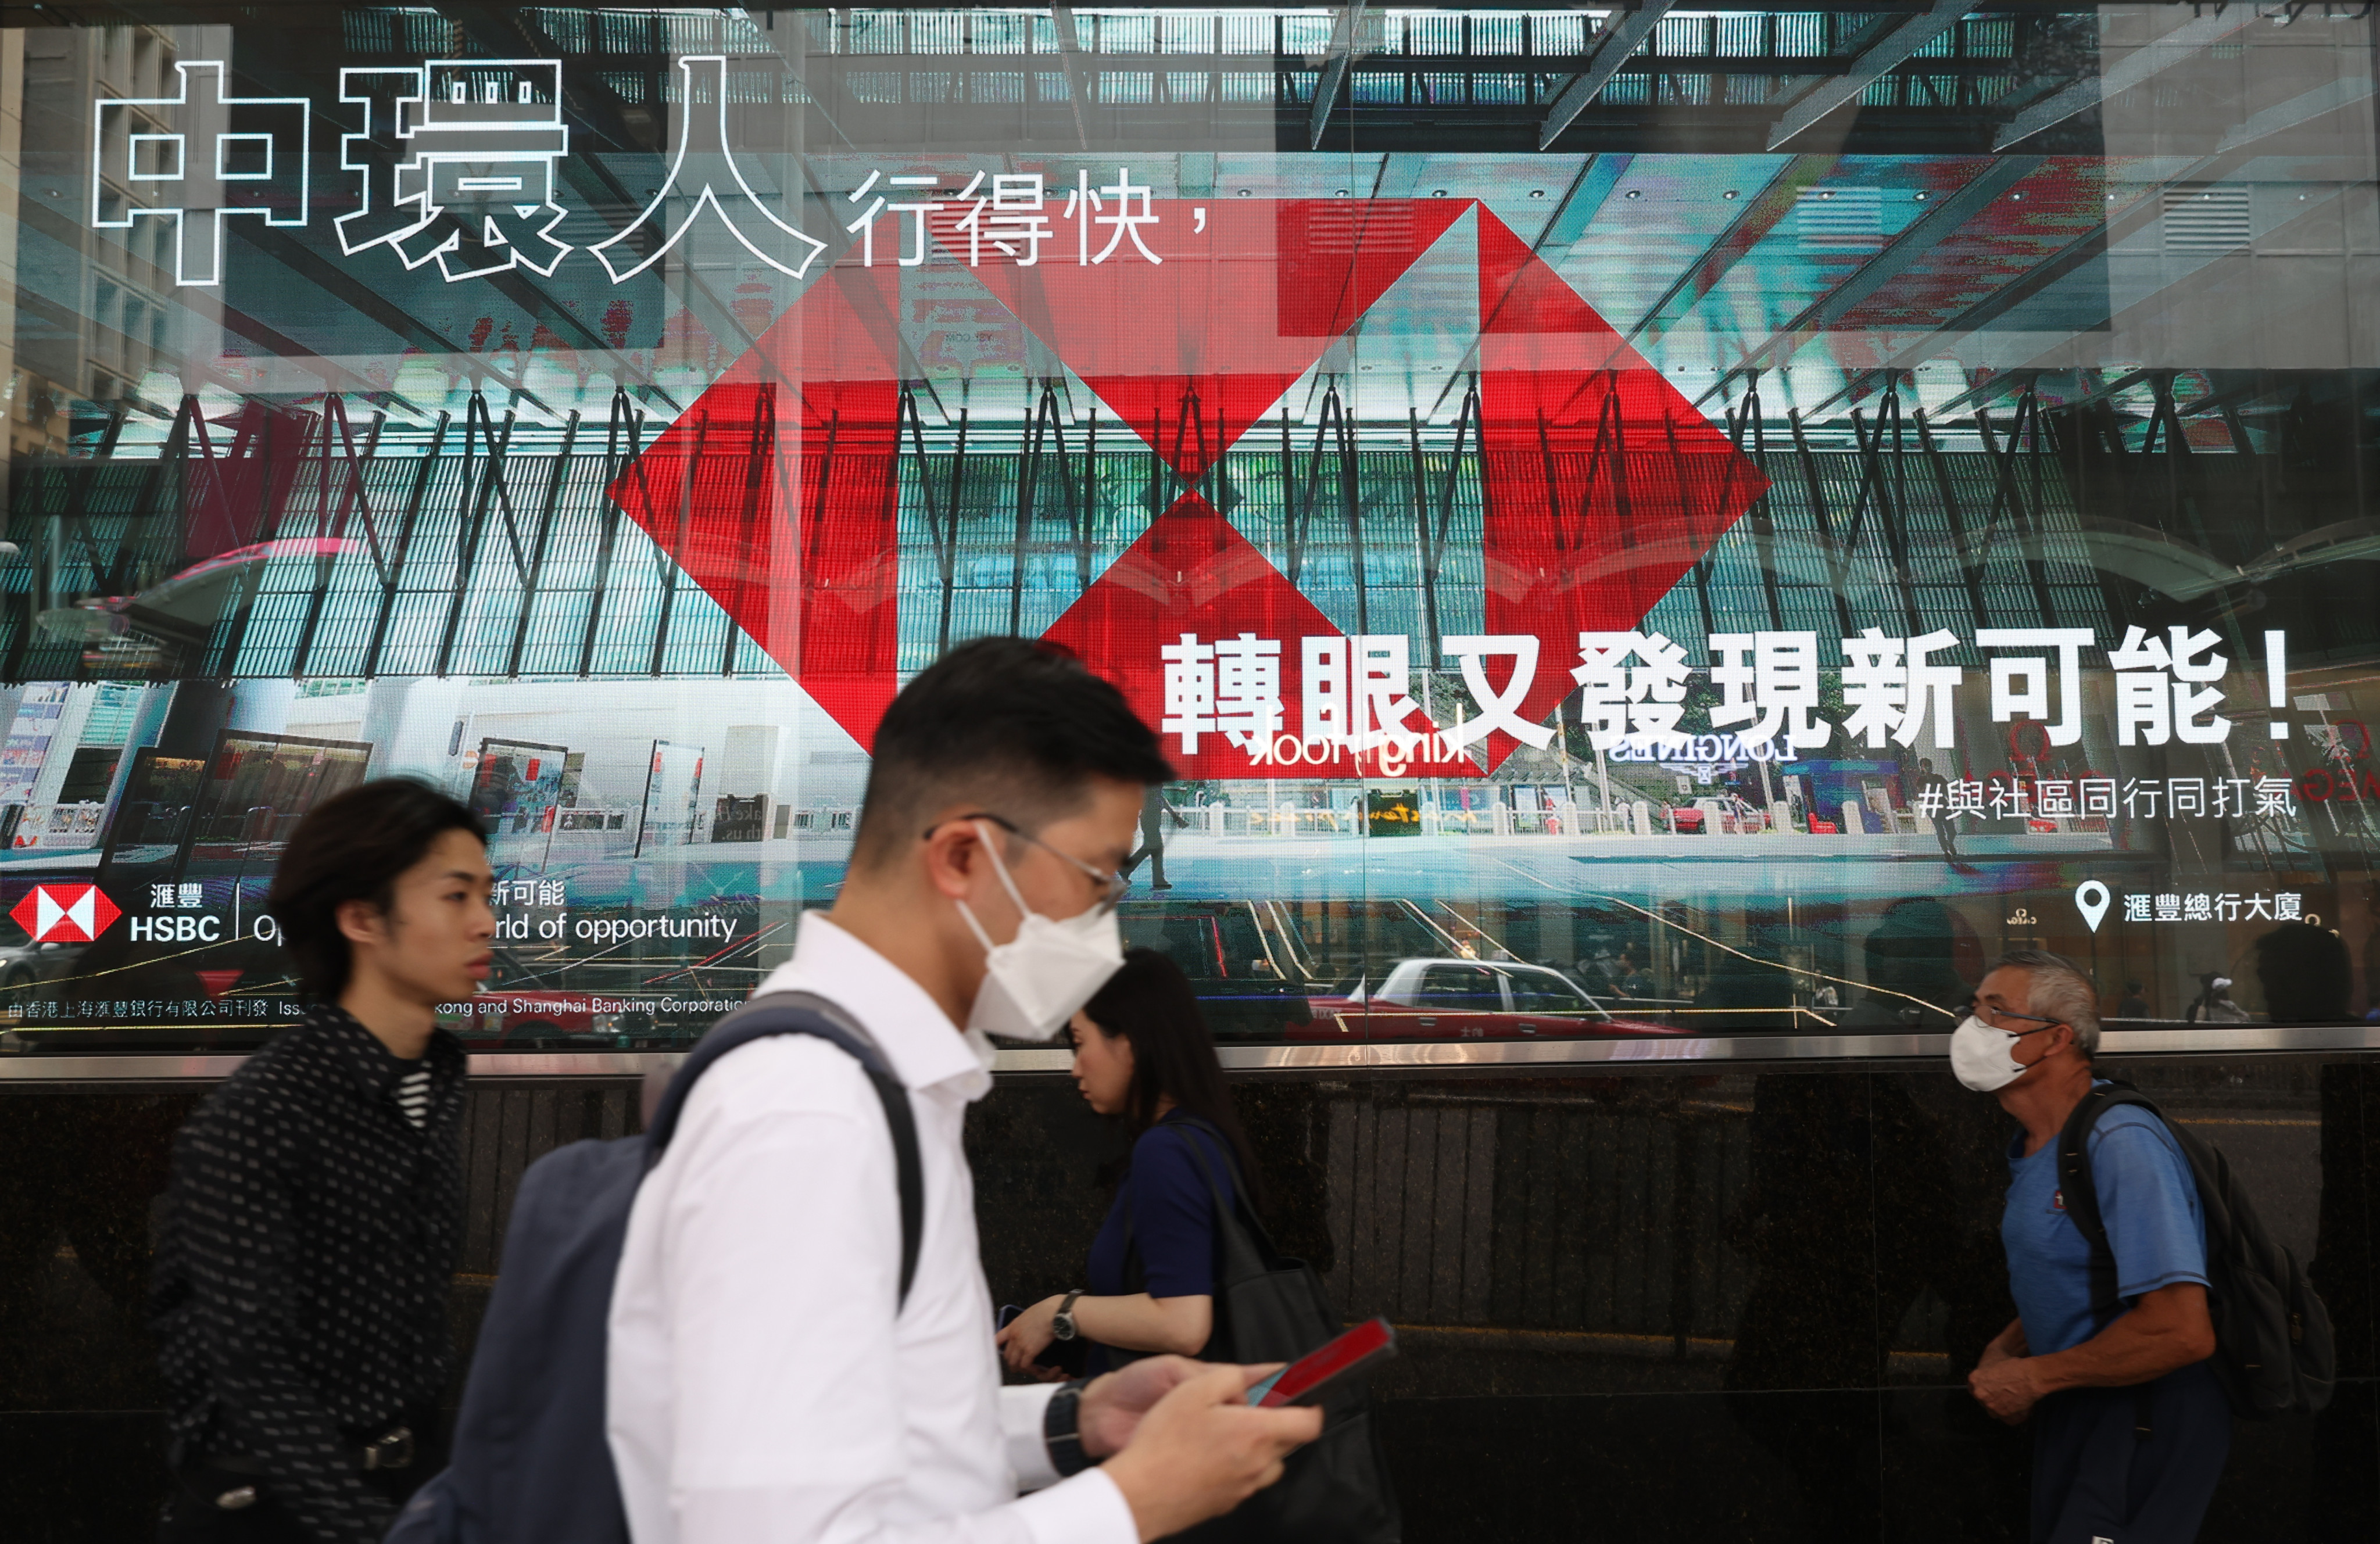 Hong Kong’s biggest banks including HSBC are likely to bump up their prime rates by 12.5 basis points to 25 basis points, most analysts surveyed by the Post said on Monday. Photo: Yik Yeung-man